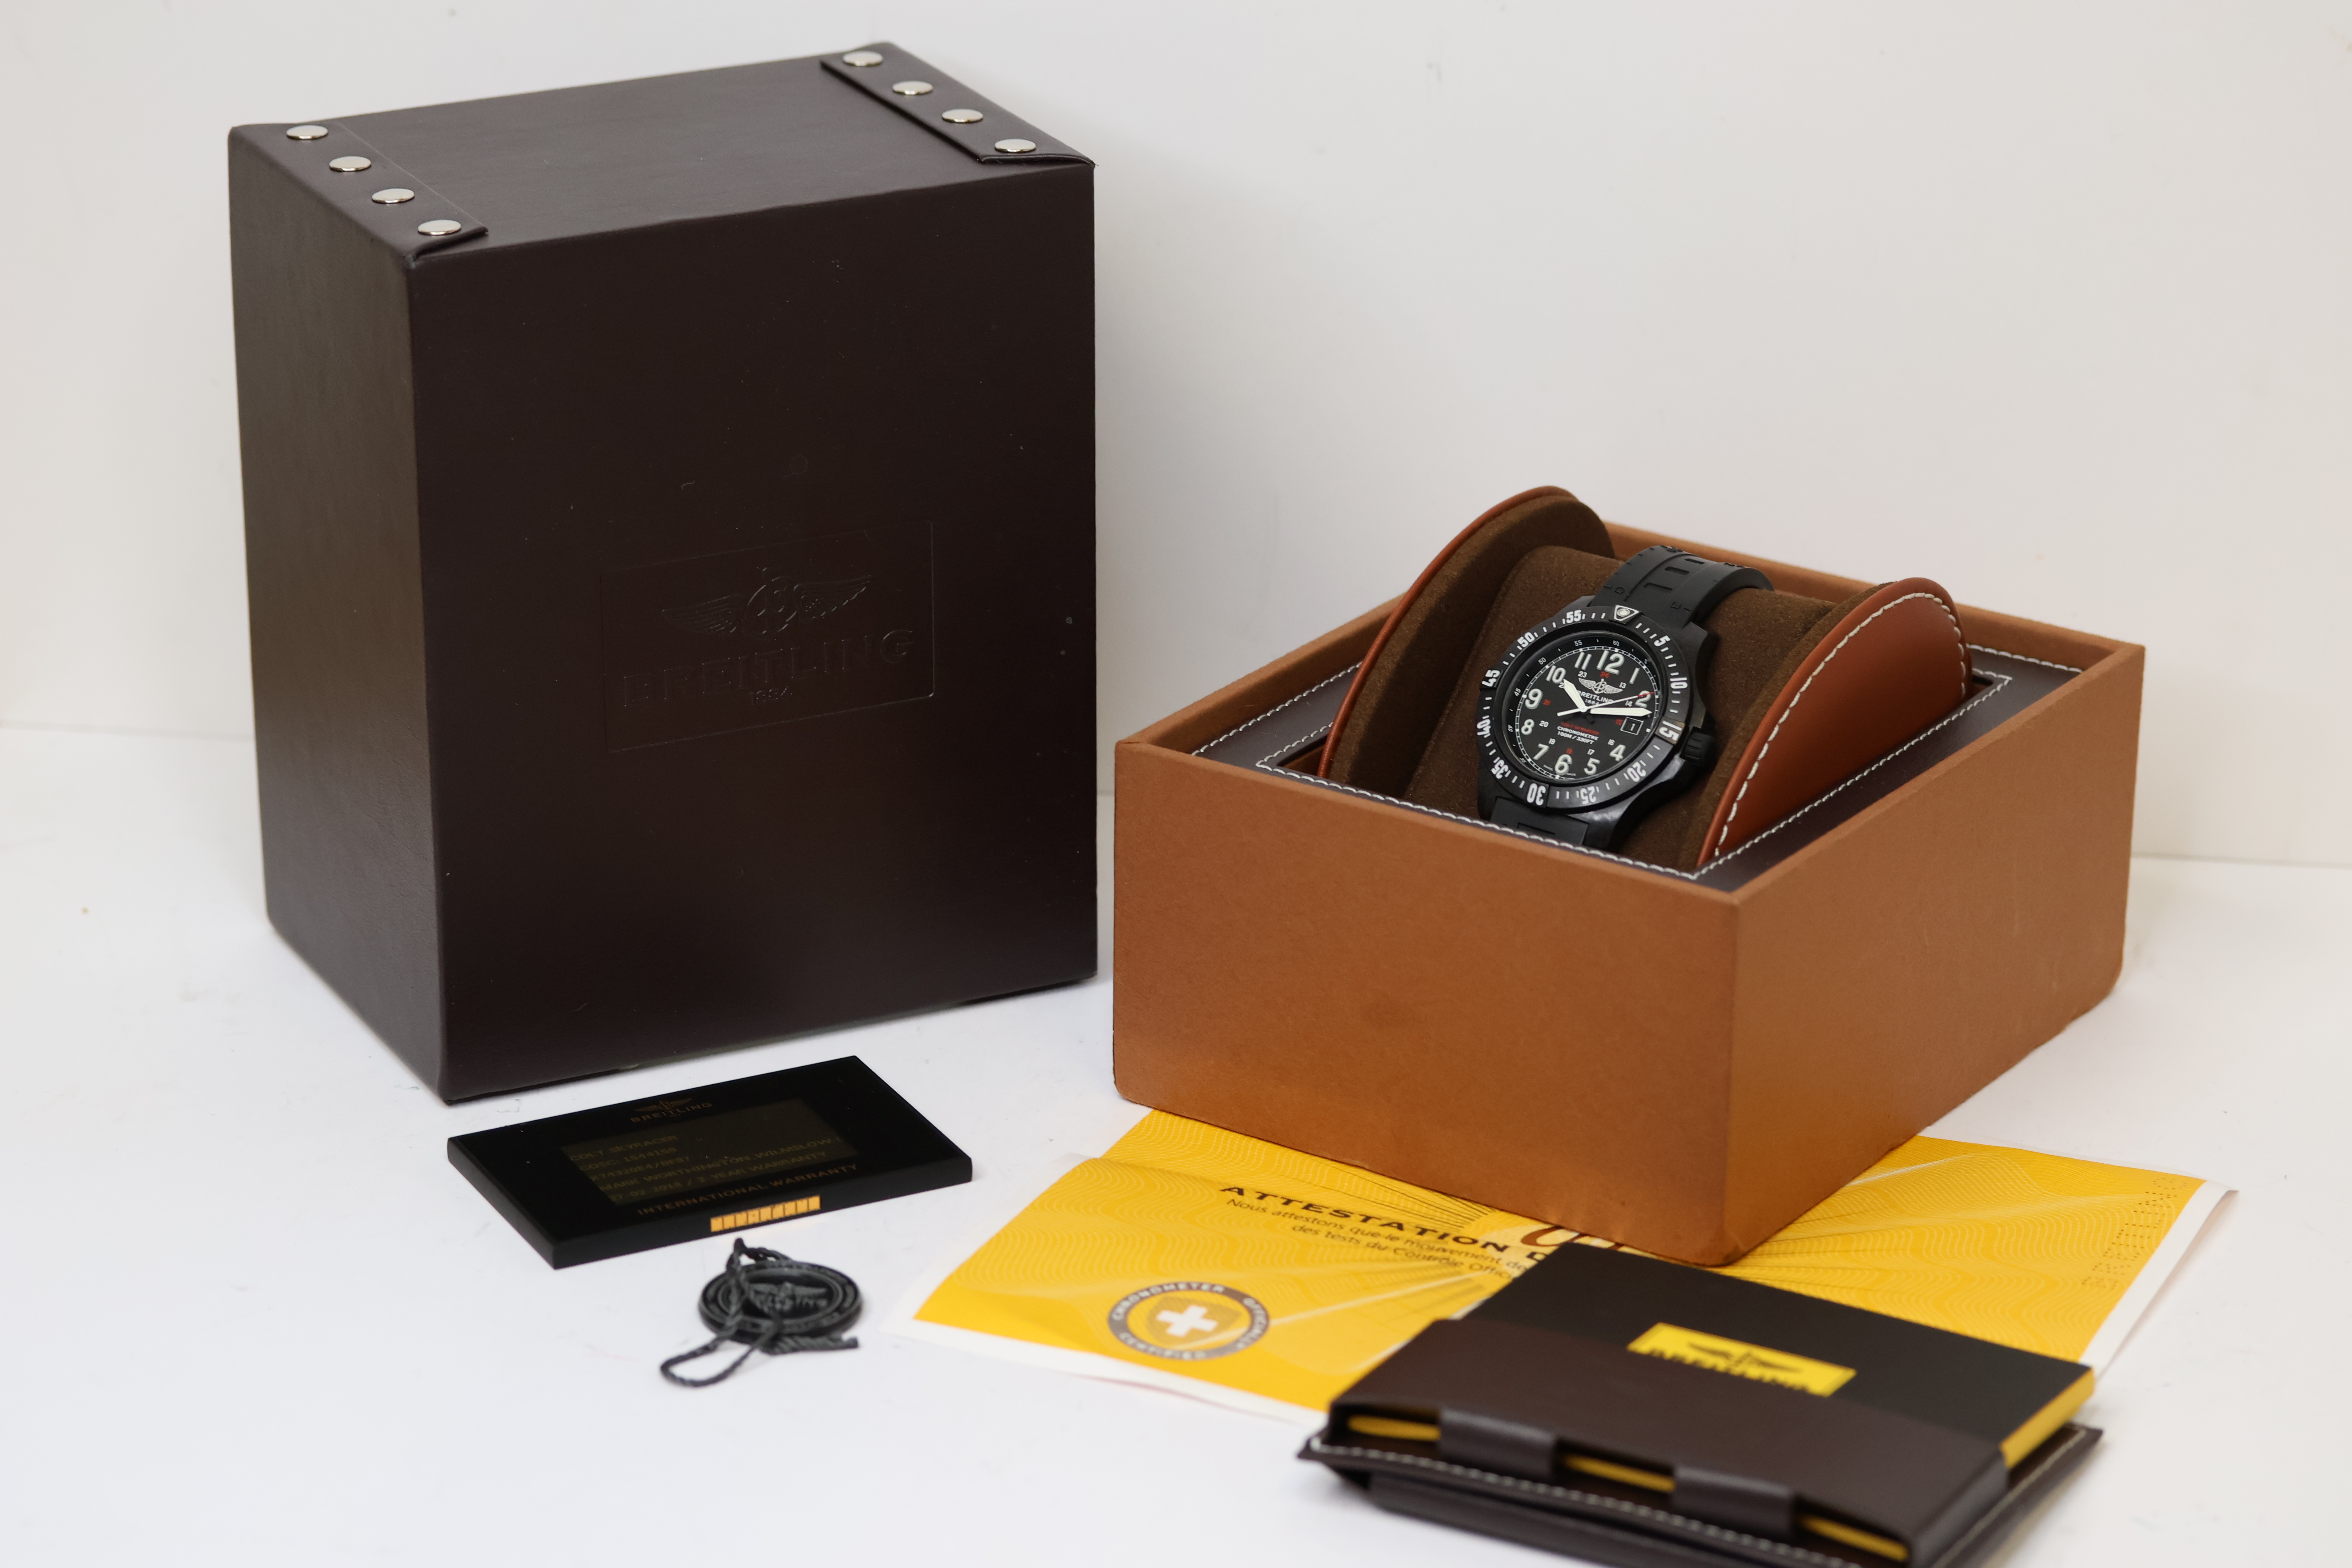 BREITLING COLT SKYRACER REFERENCE X74320 WITH BOX AND PAPERS 2018, 45mm black carbon case, a black